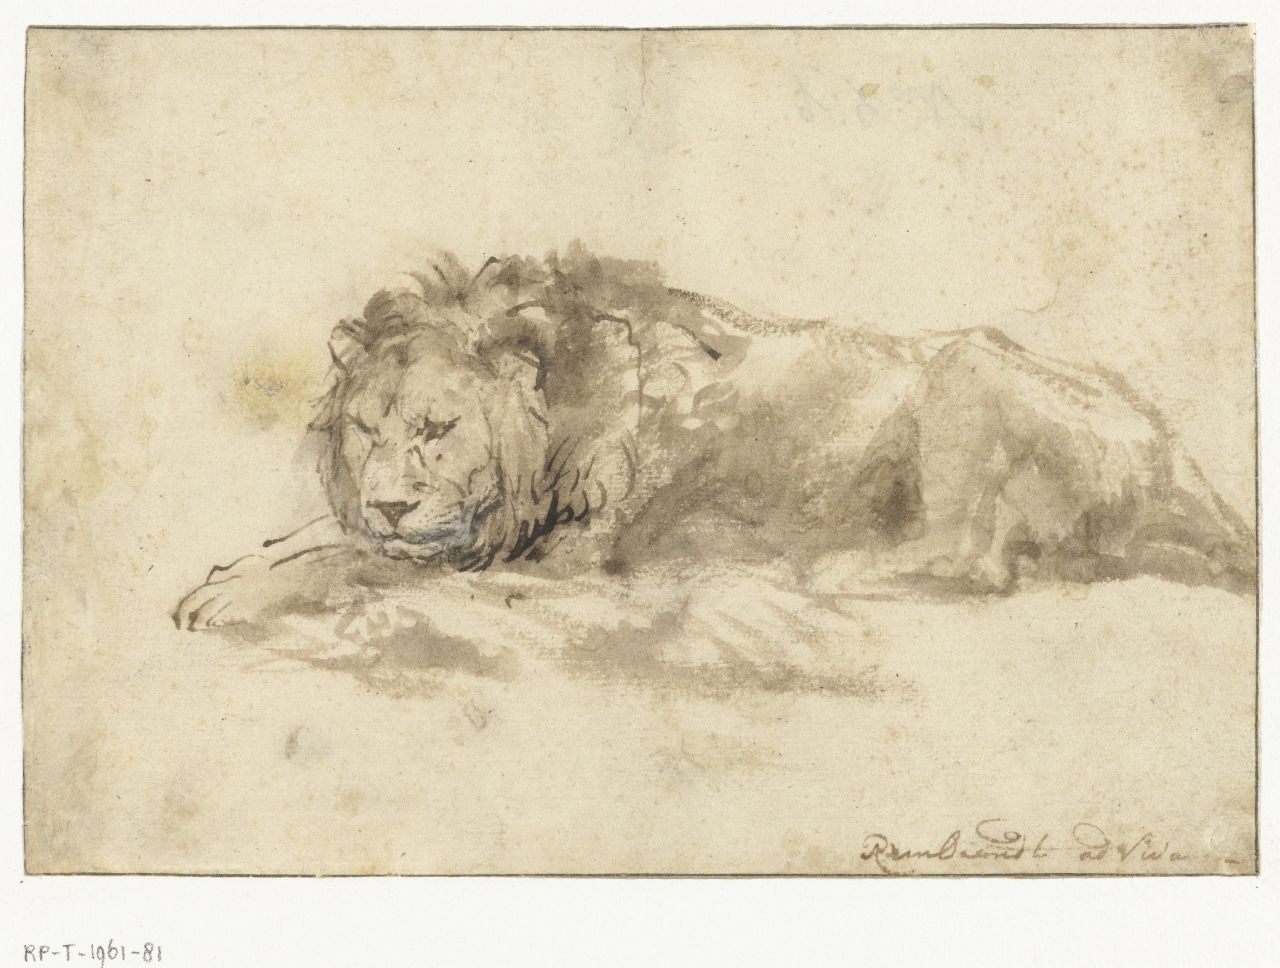 This drawing of a lion (1650-1959), belonging to the Rijksmuseum in Amsterdam, is one of the few surviving animal studies by Rembrandt van Rijn.